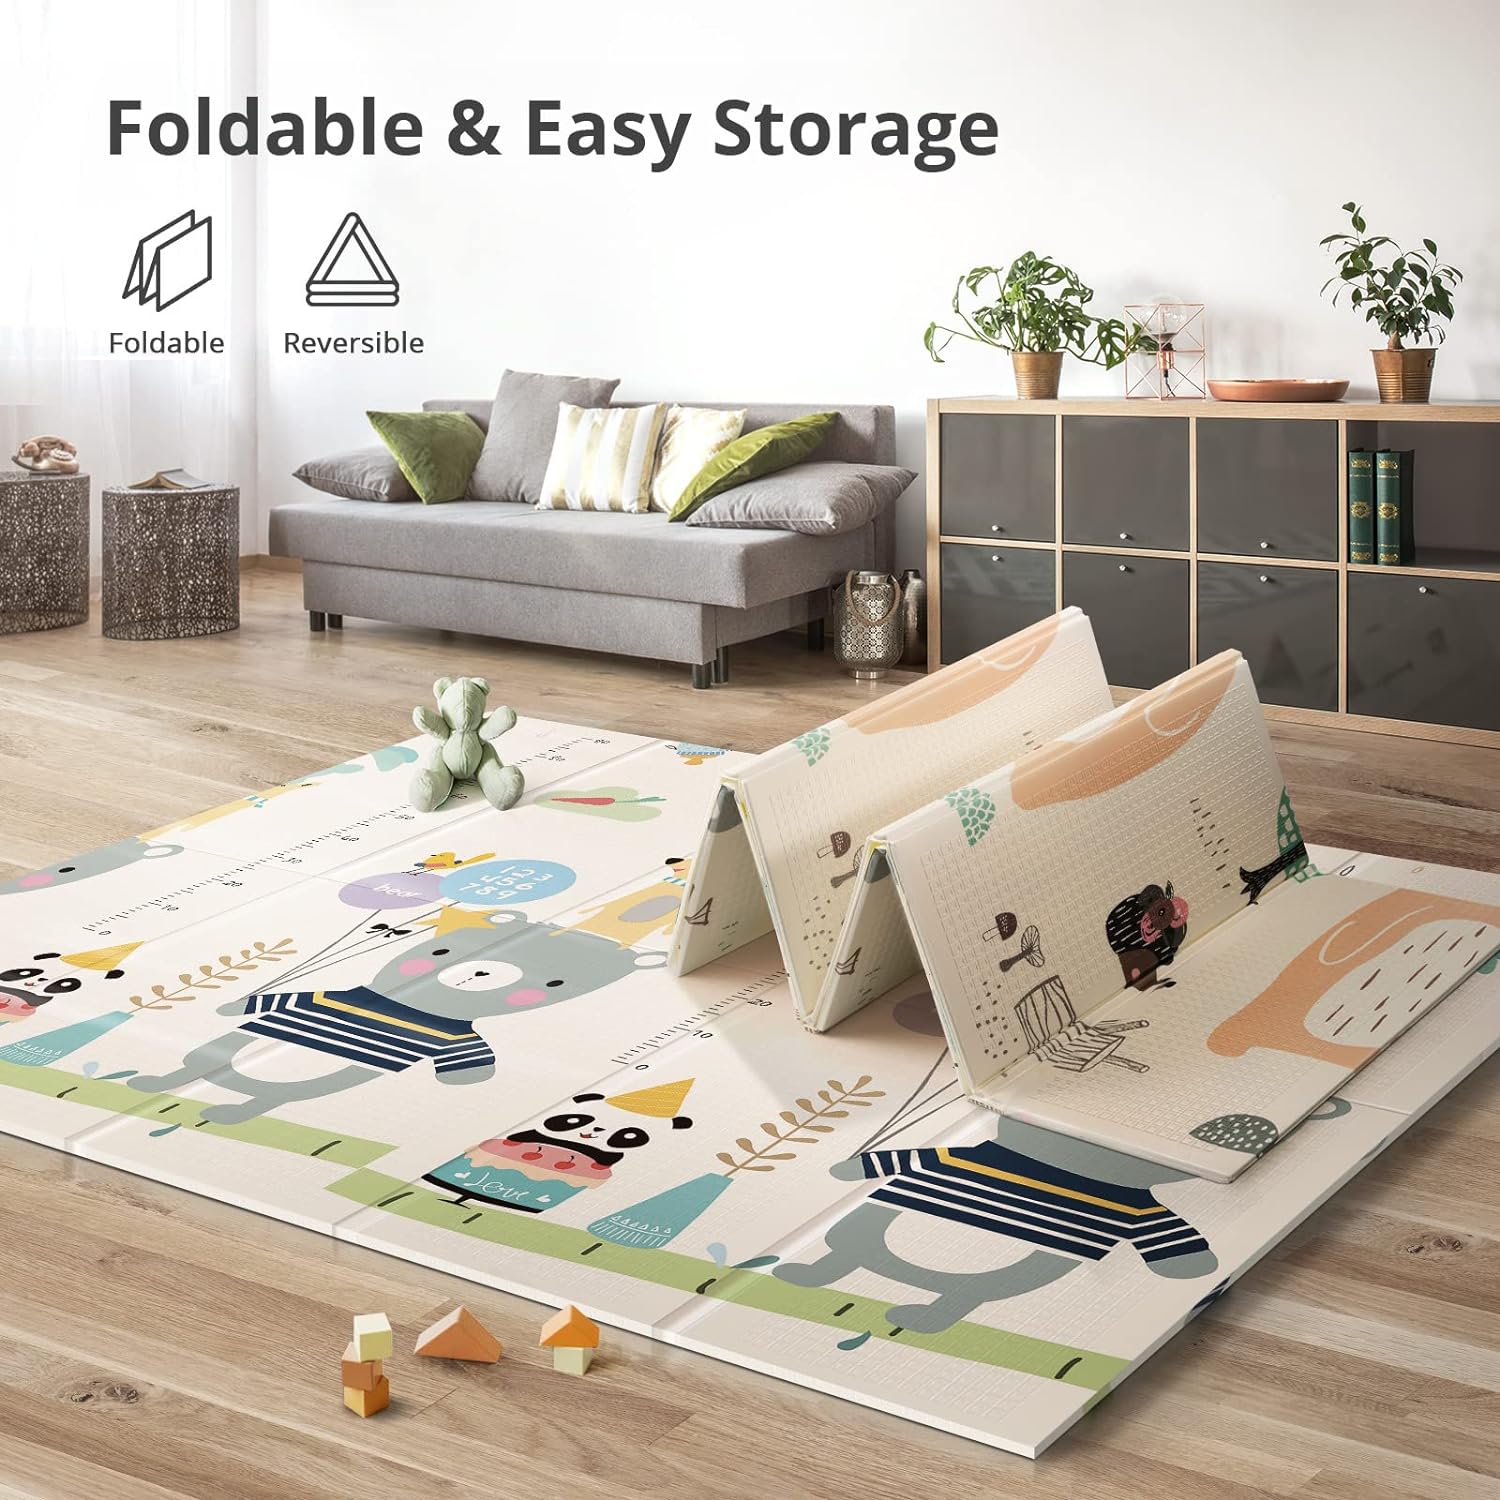 https://bigbigmart.com/wp-content/uploads/2023/11/UANLAUO-Foldable-Baby-Play-Mat-Extra-Large-Waterproof-Activity-Playmats-for-BabiesToddlers-Infants-Play-Tummy-Time-Foam-Baby-Mat-for-Floor-with-Travel-Bag-Bear71x59x0.4inch5.jpg